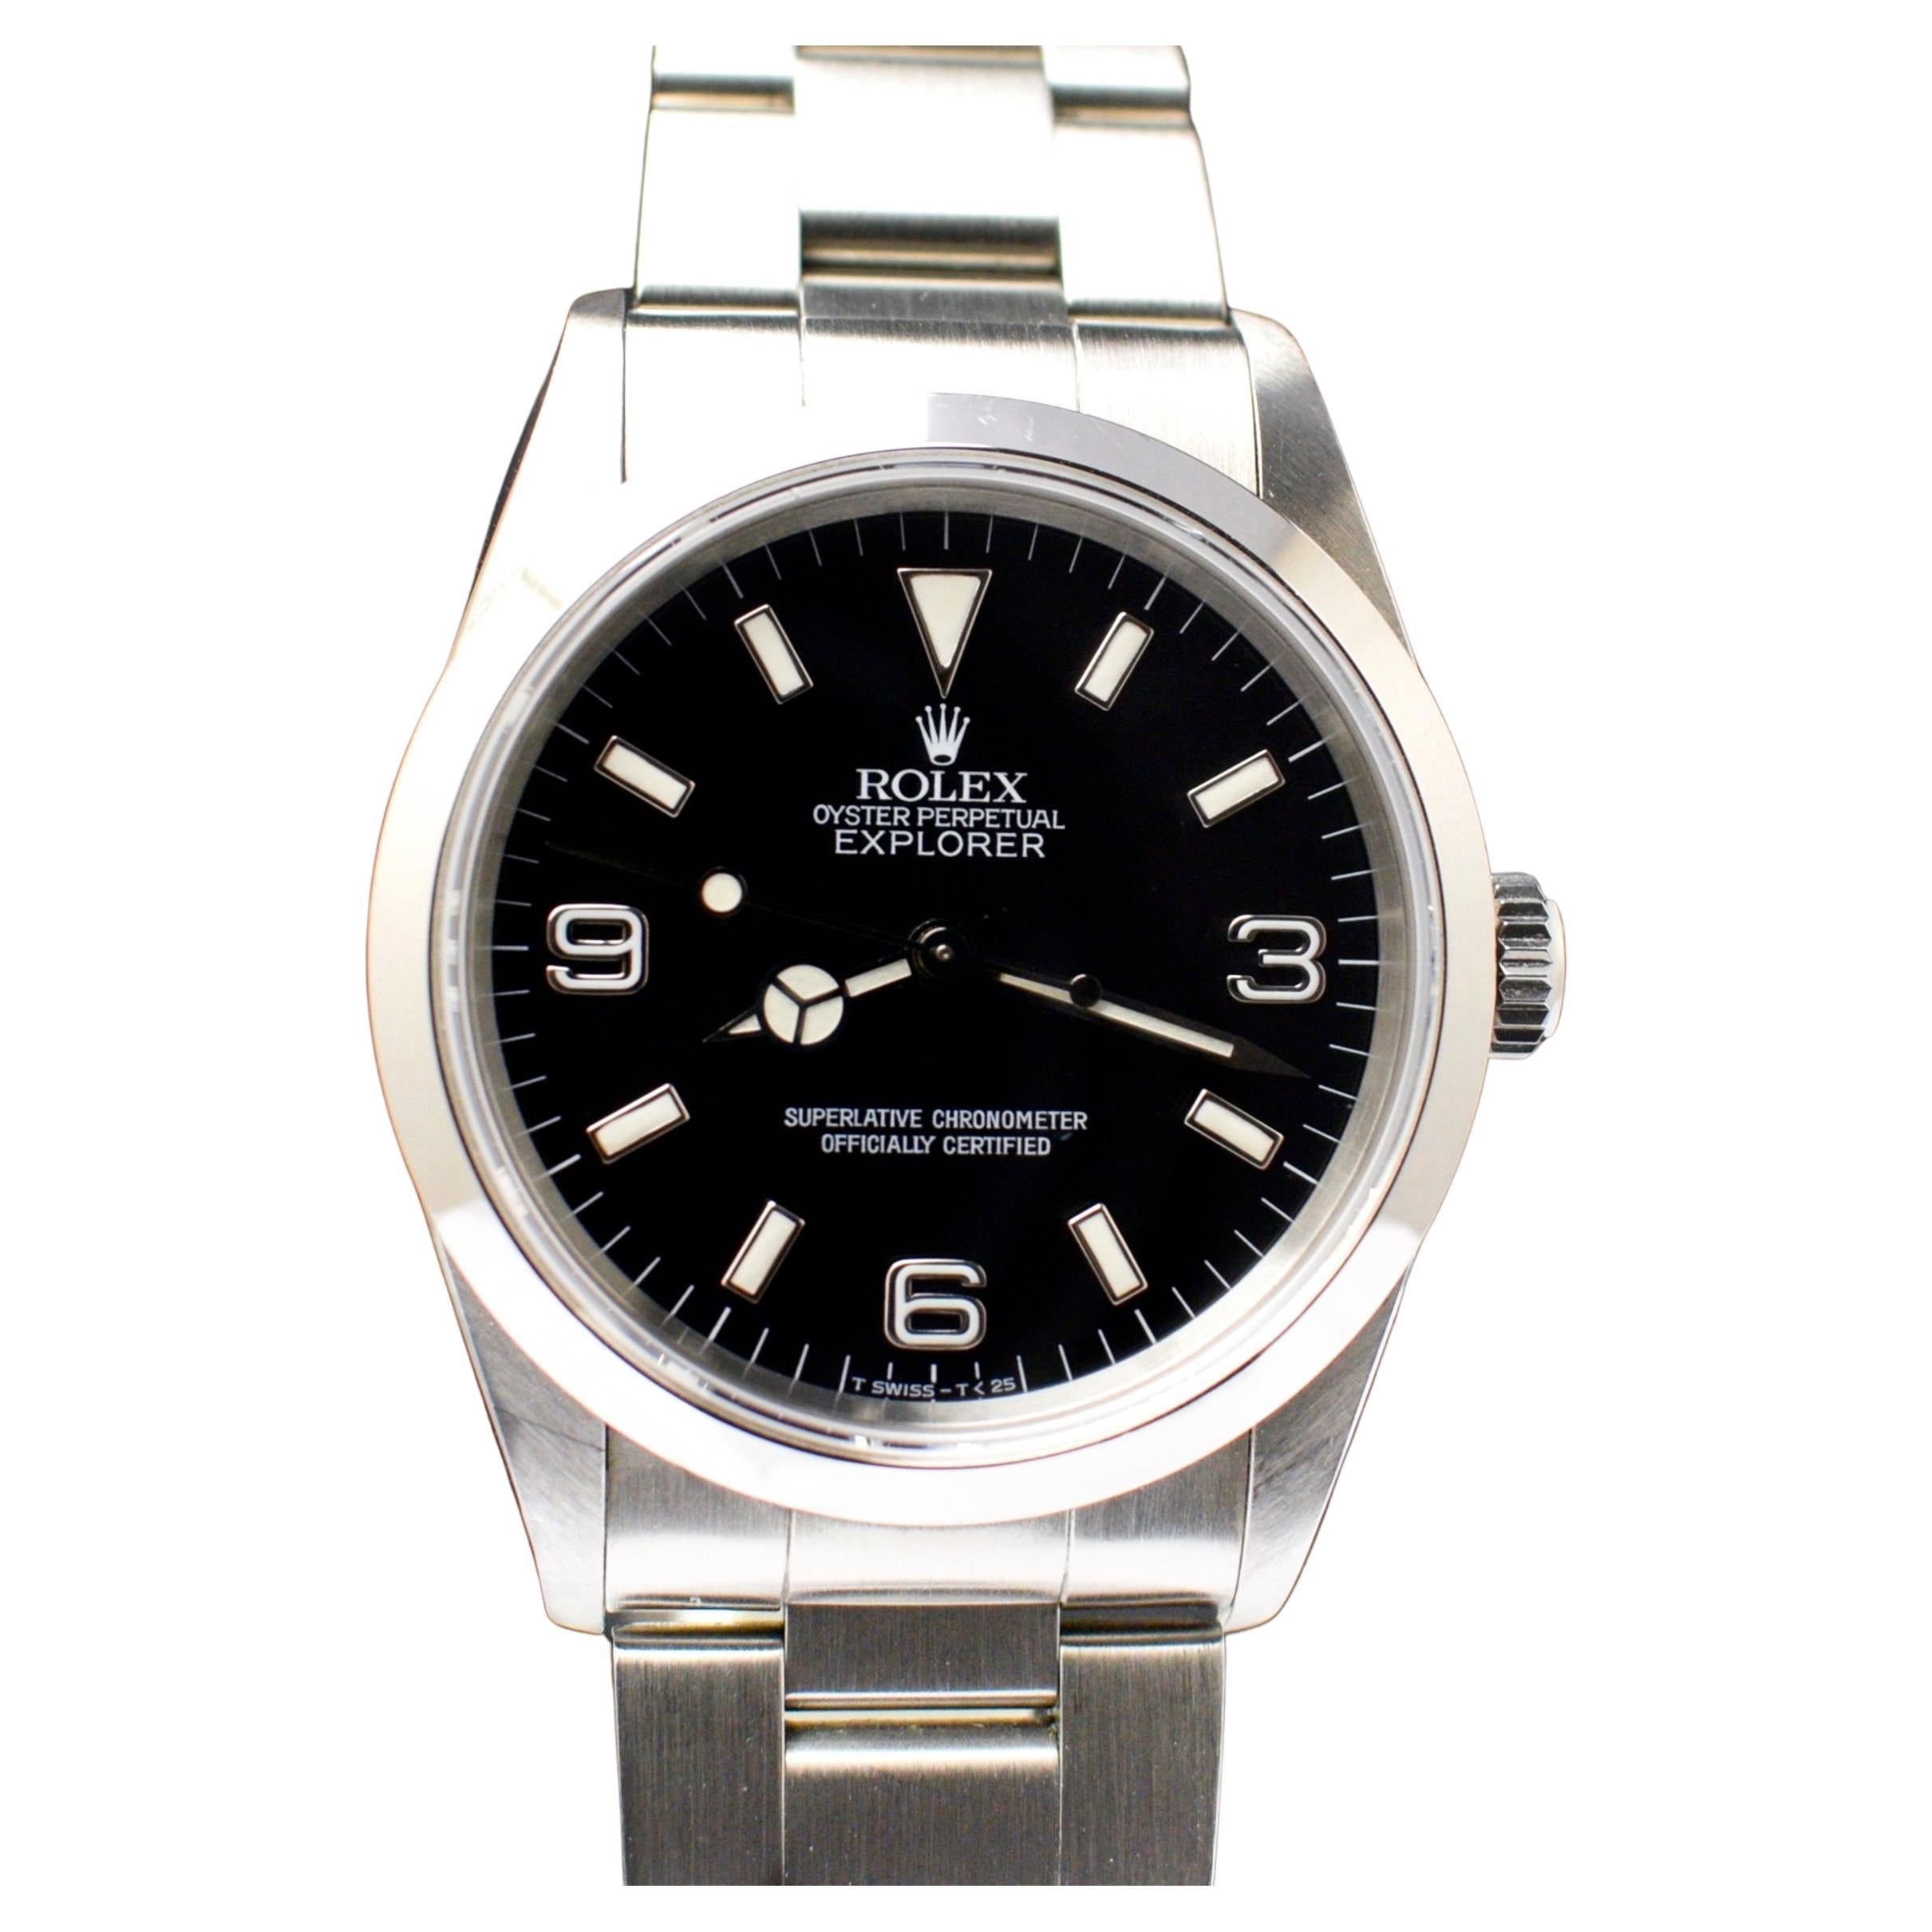 Rolex Explorer I Steel 14270 Tritium Automatic Watch with Paper and Tag, 1997